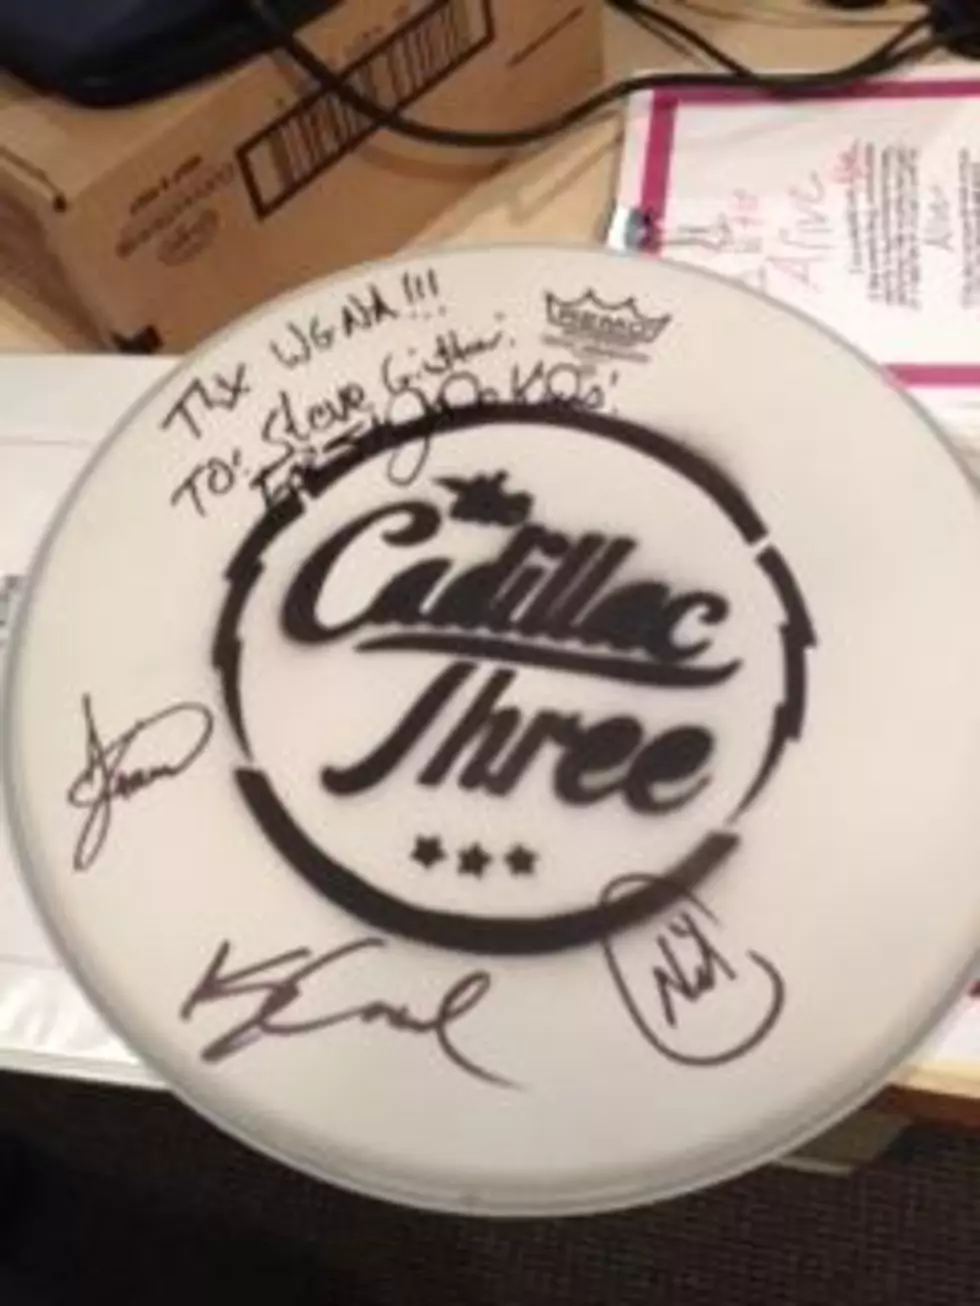 Win A Drum Head Signed By The Cadillac Three For St. Jude Kids